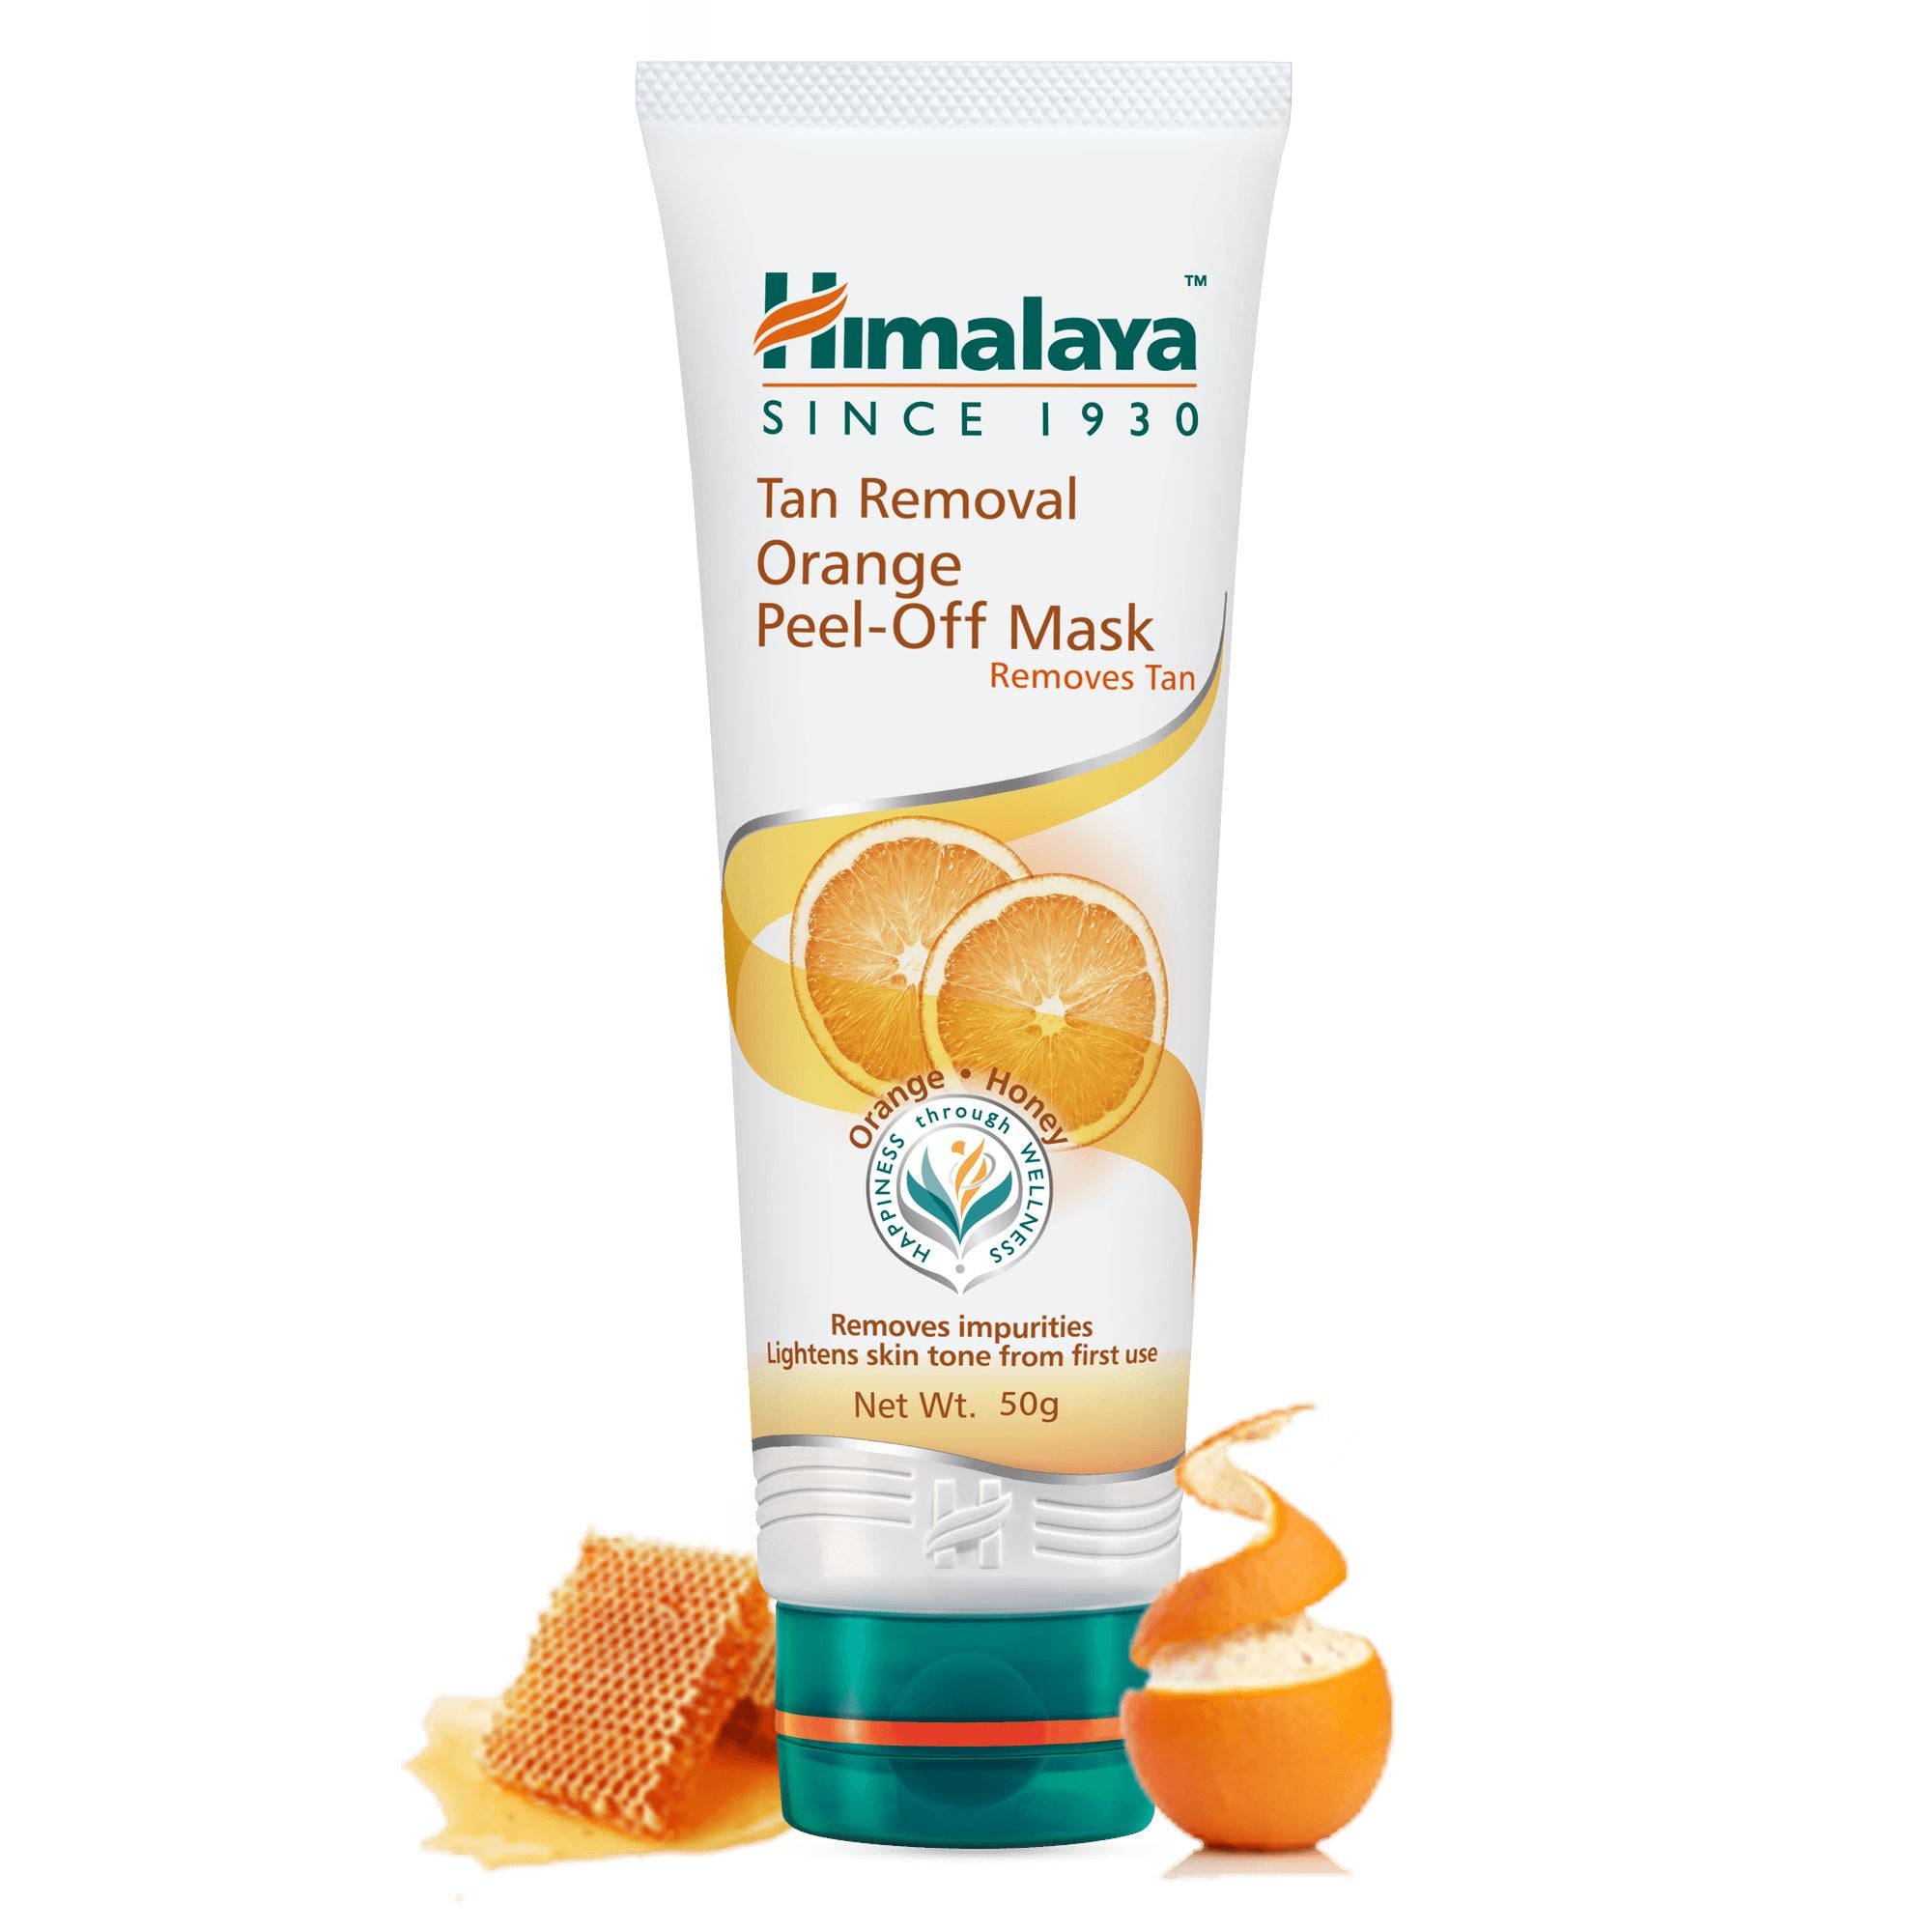 Himalaya Tan Removal Orange Peel-Off Mask 50g - Removes impurities. Lightens skin tone from first use